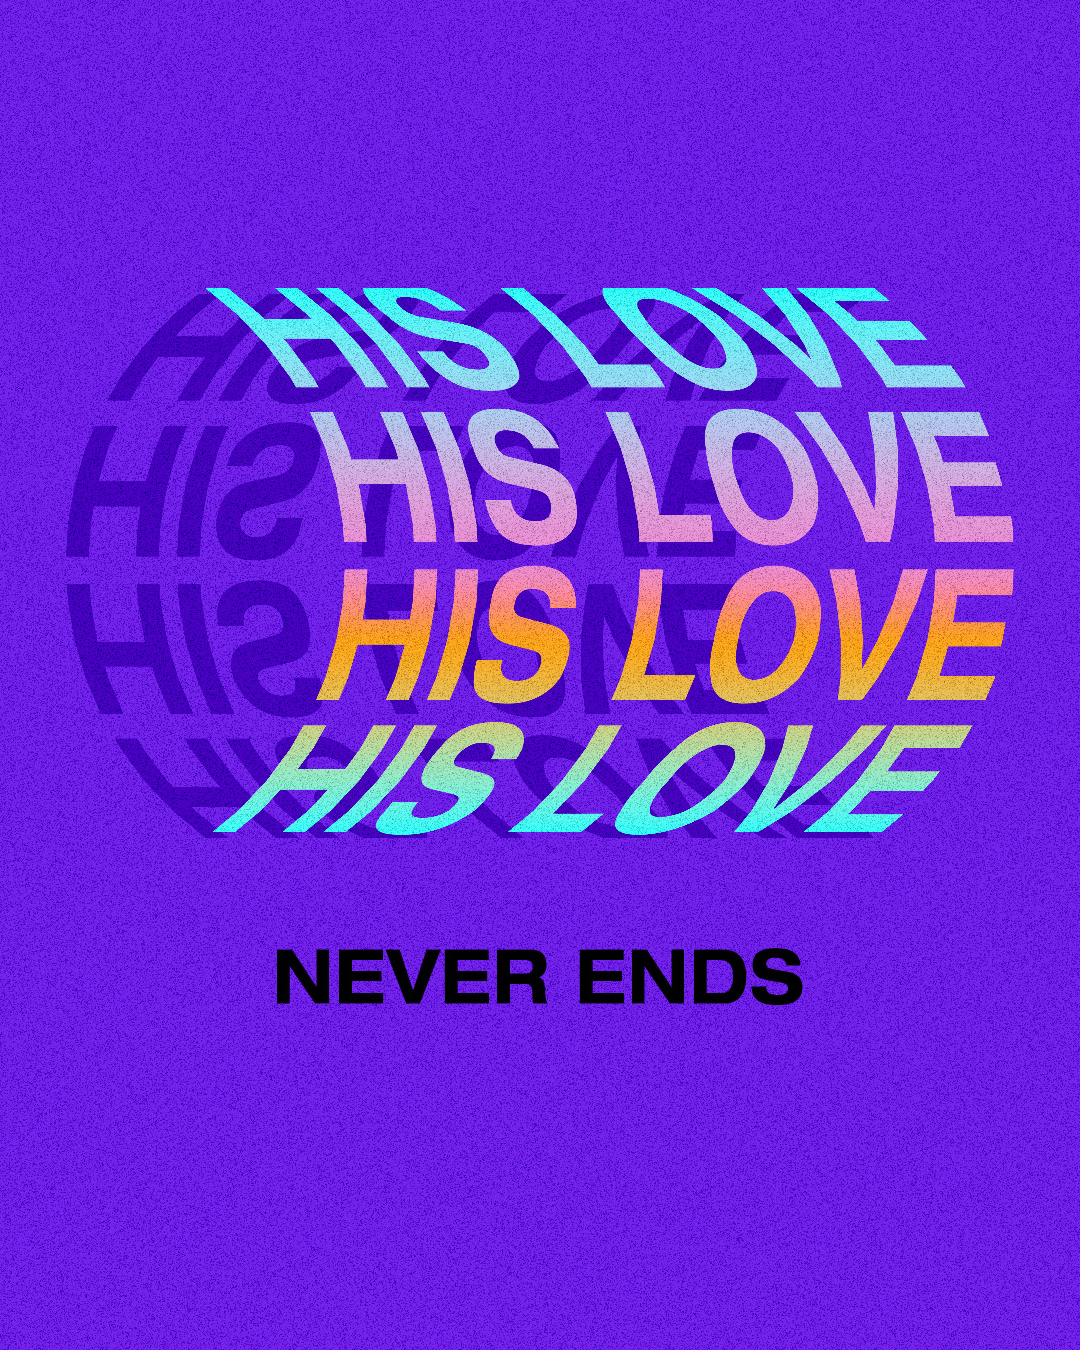 His love never ends